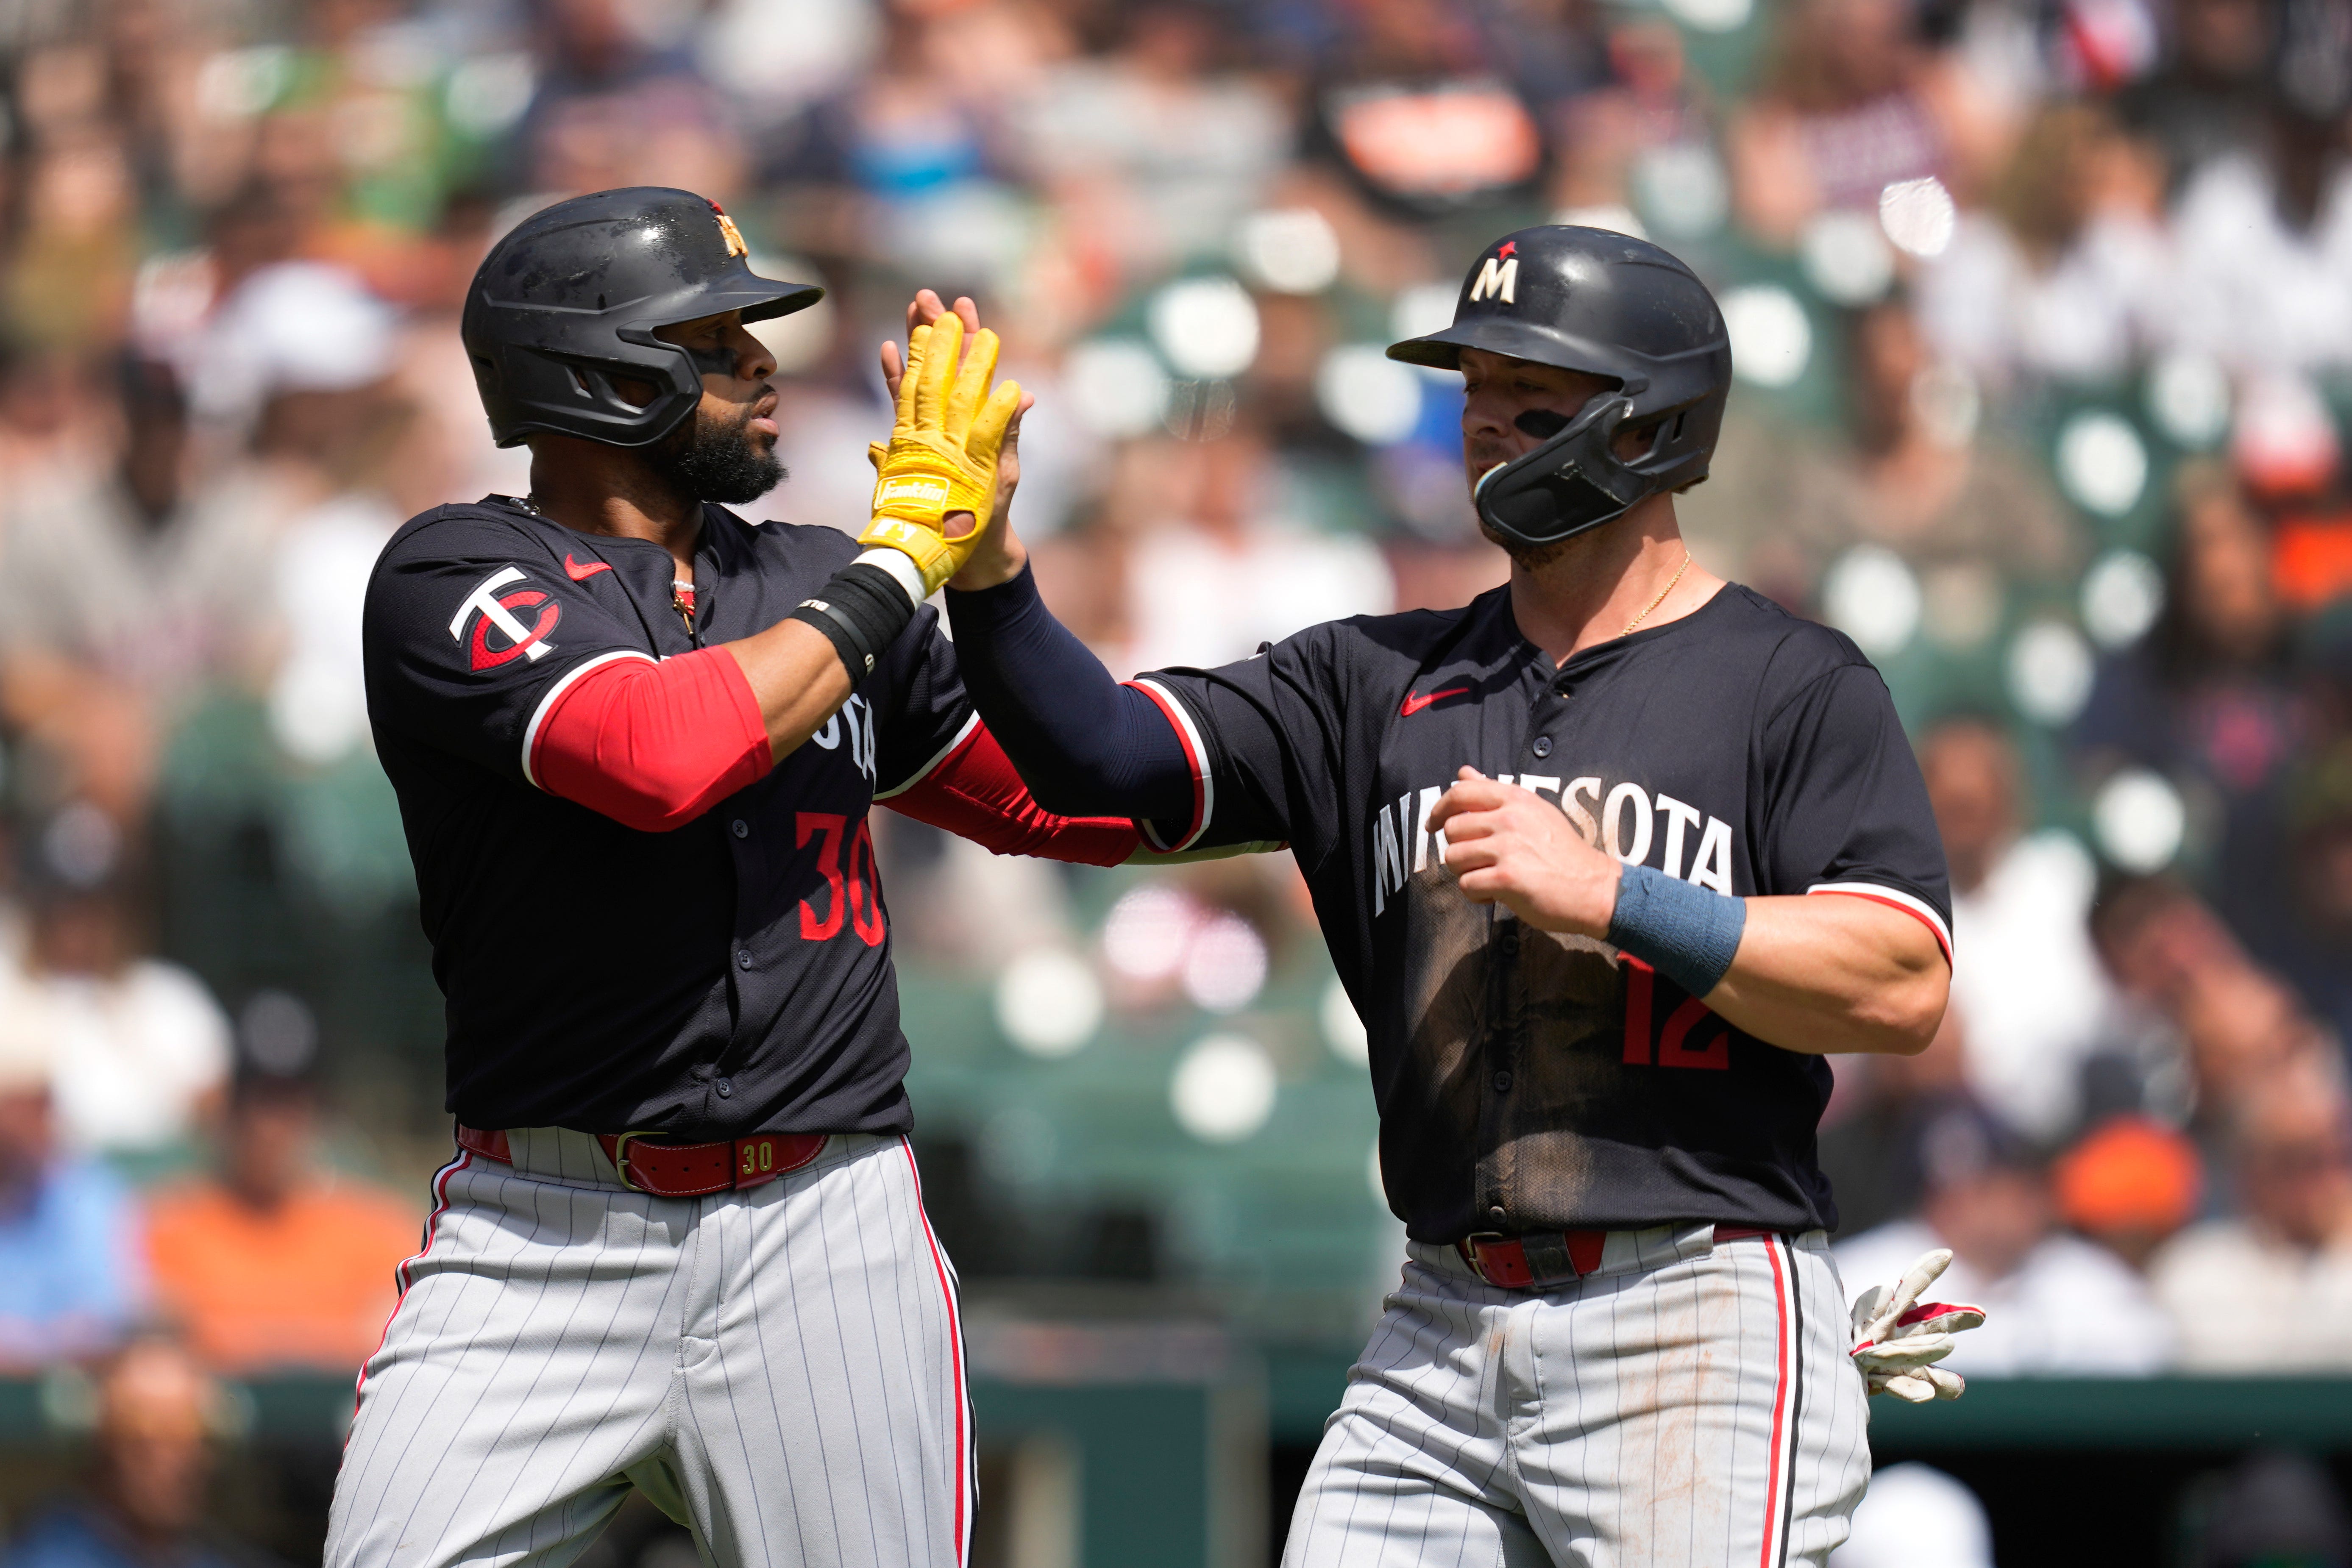 The Twins' Carlos Santana (30) and Kyle Farmer (12) celebrate scoring in the second inning.